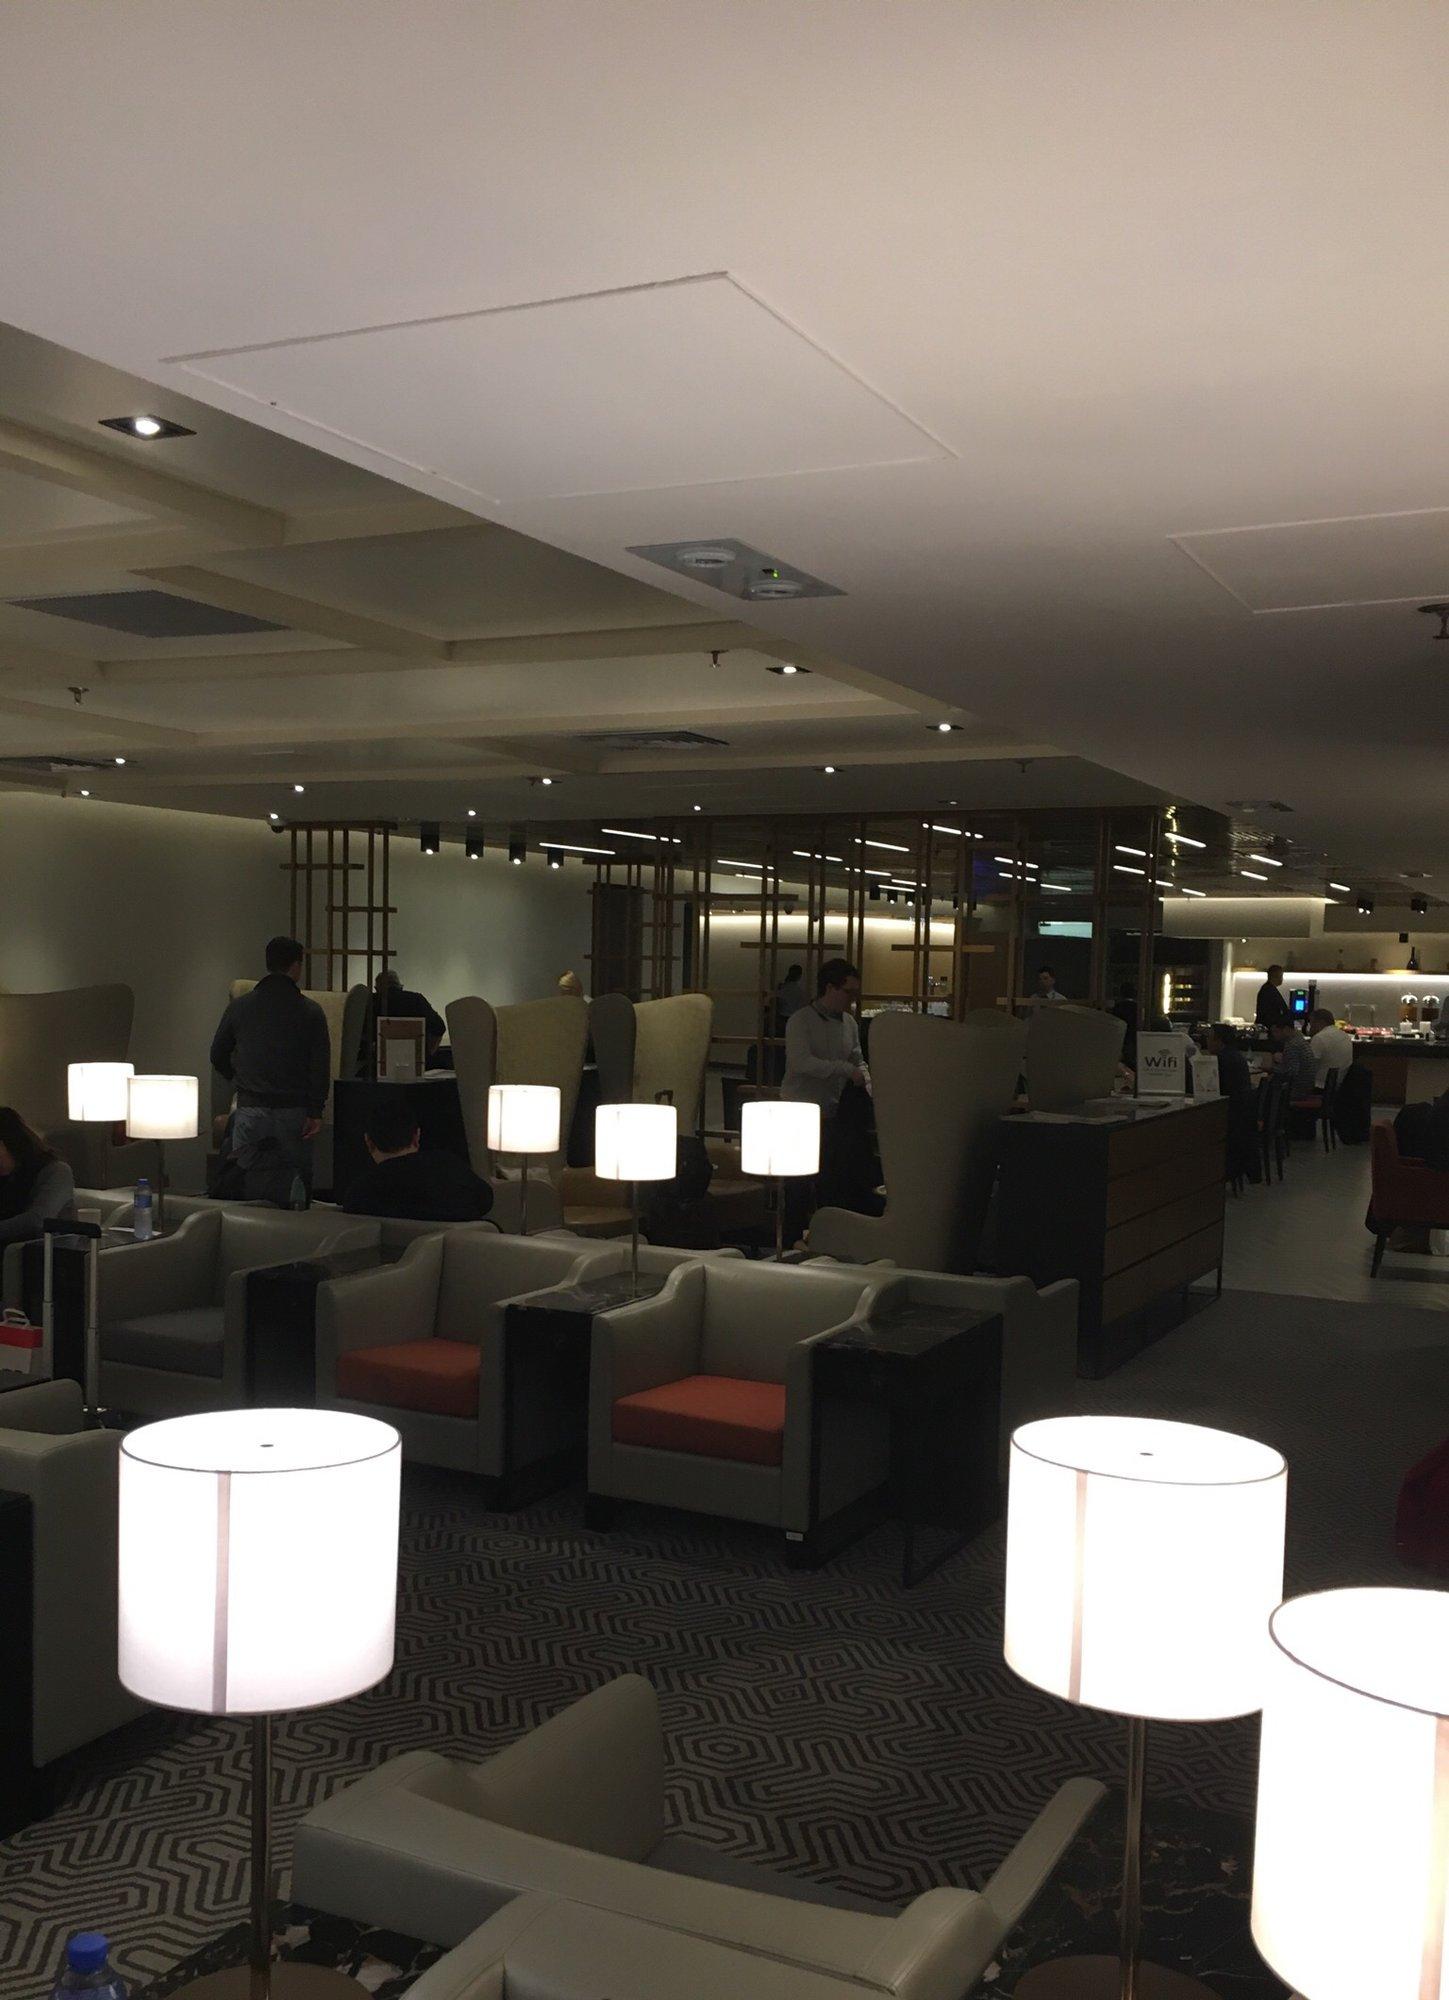 Singapore Airlines SilverKris Business Class Lounge image 42 of 68